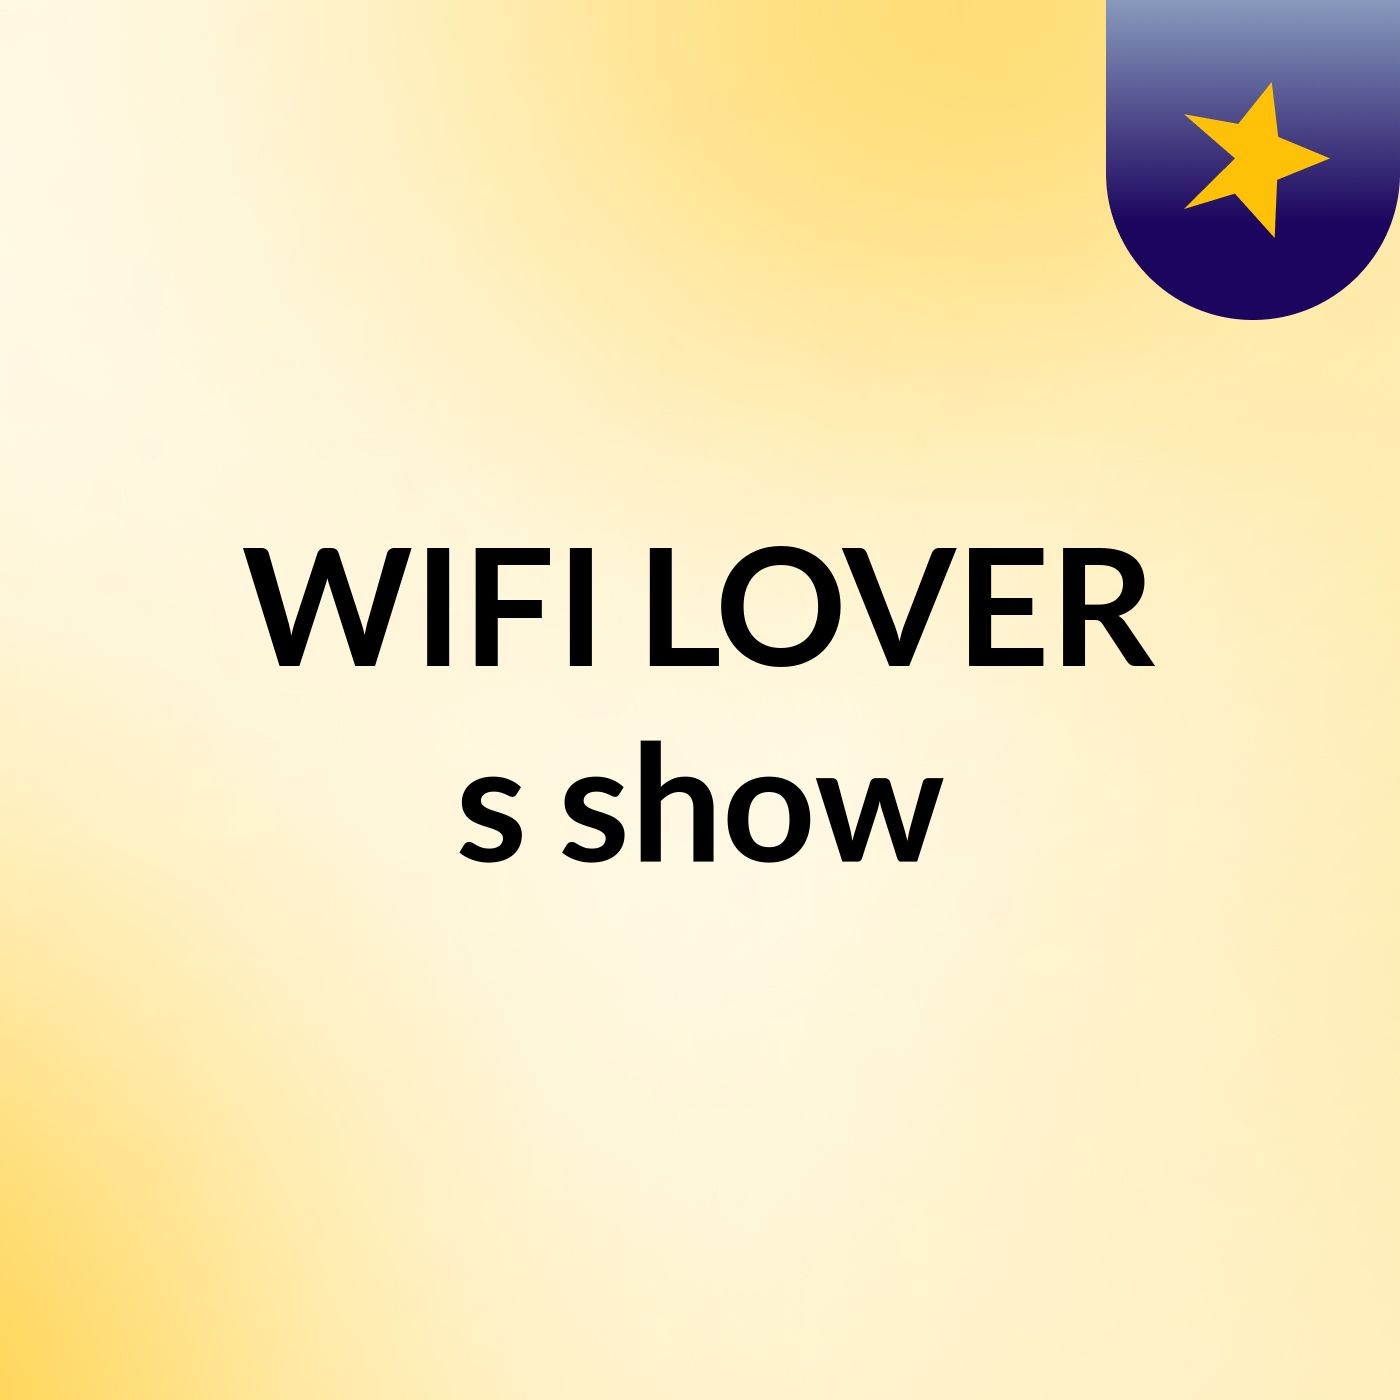 WIFI LOVER's show